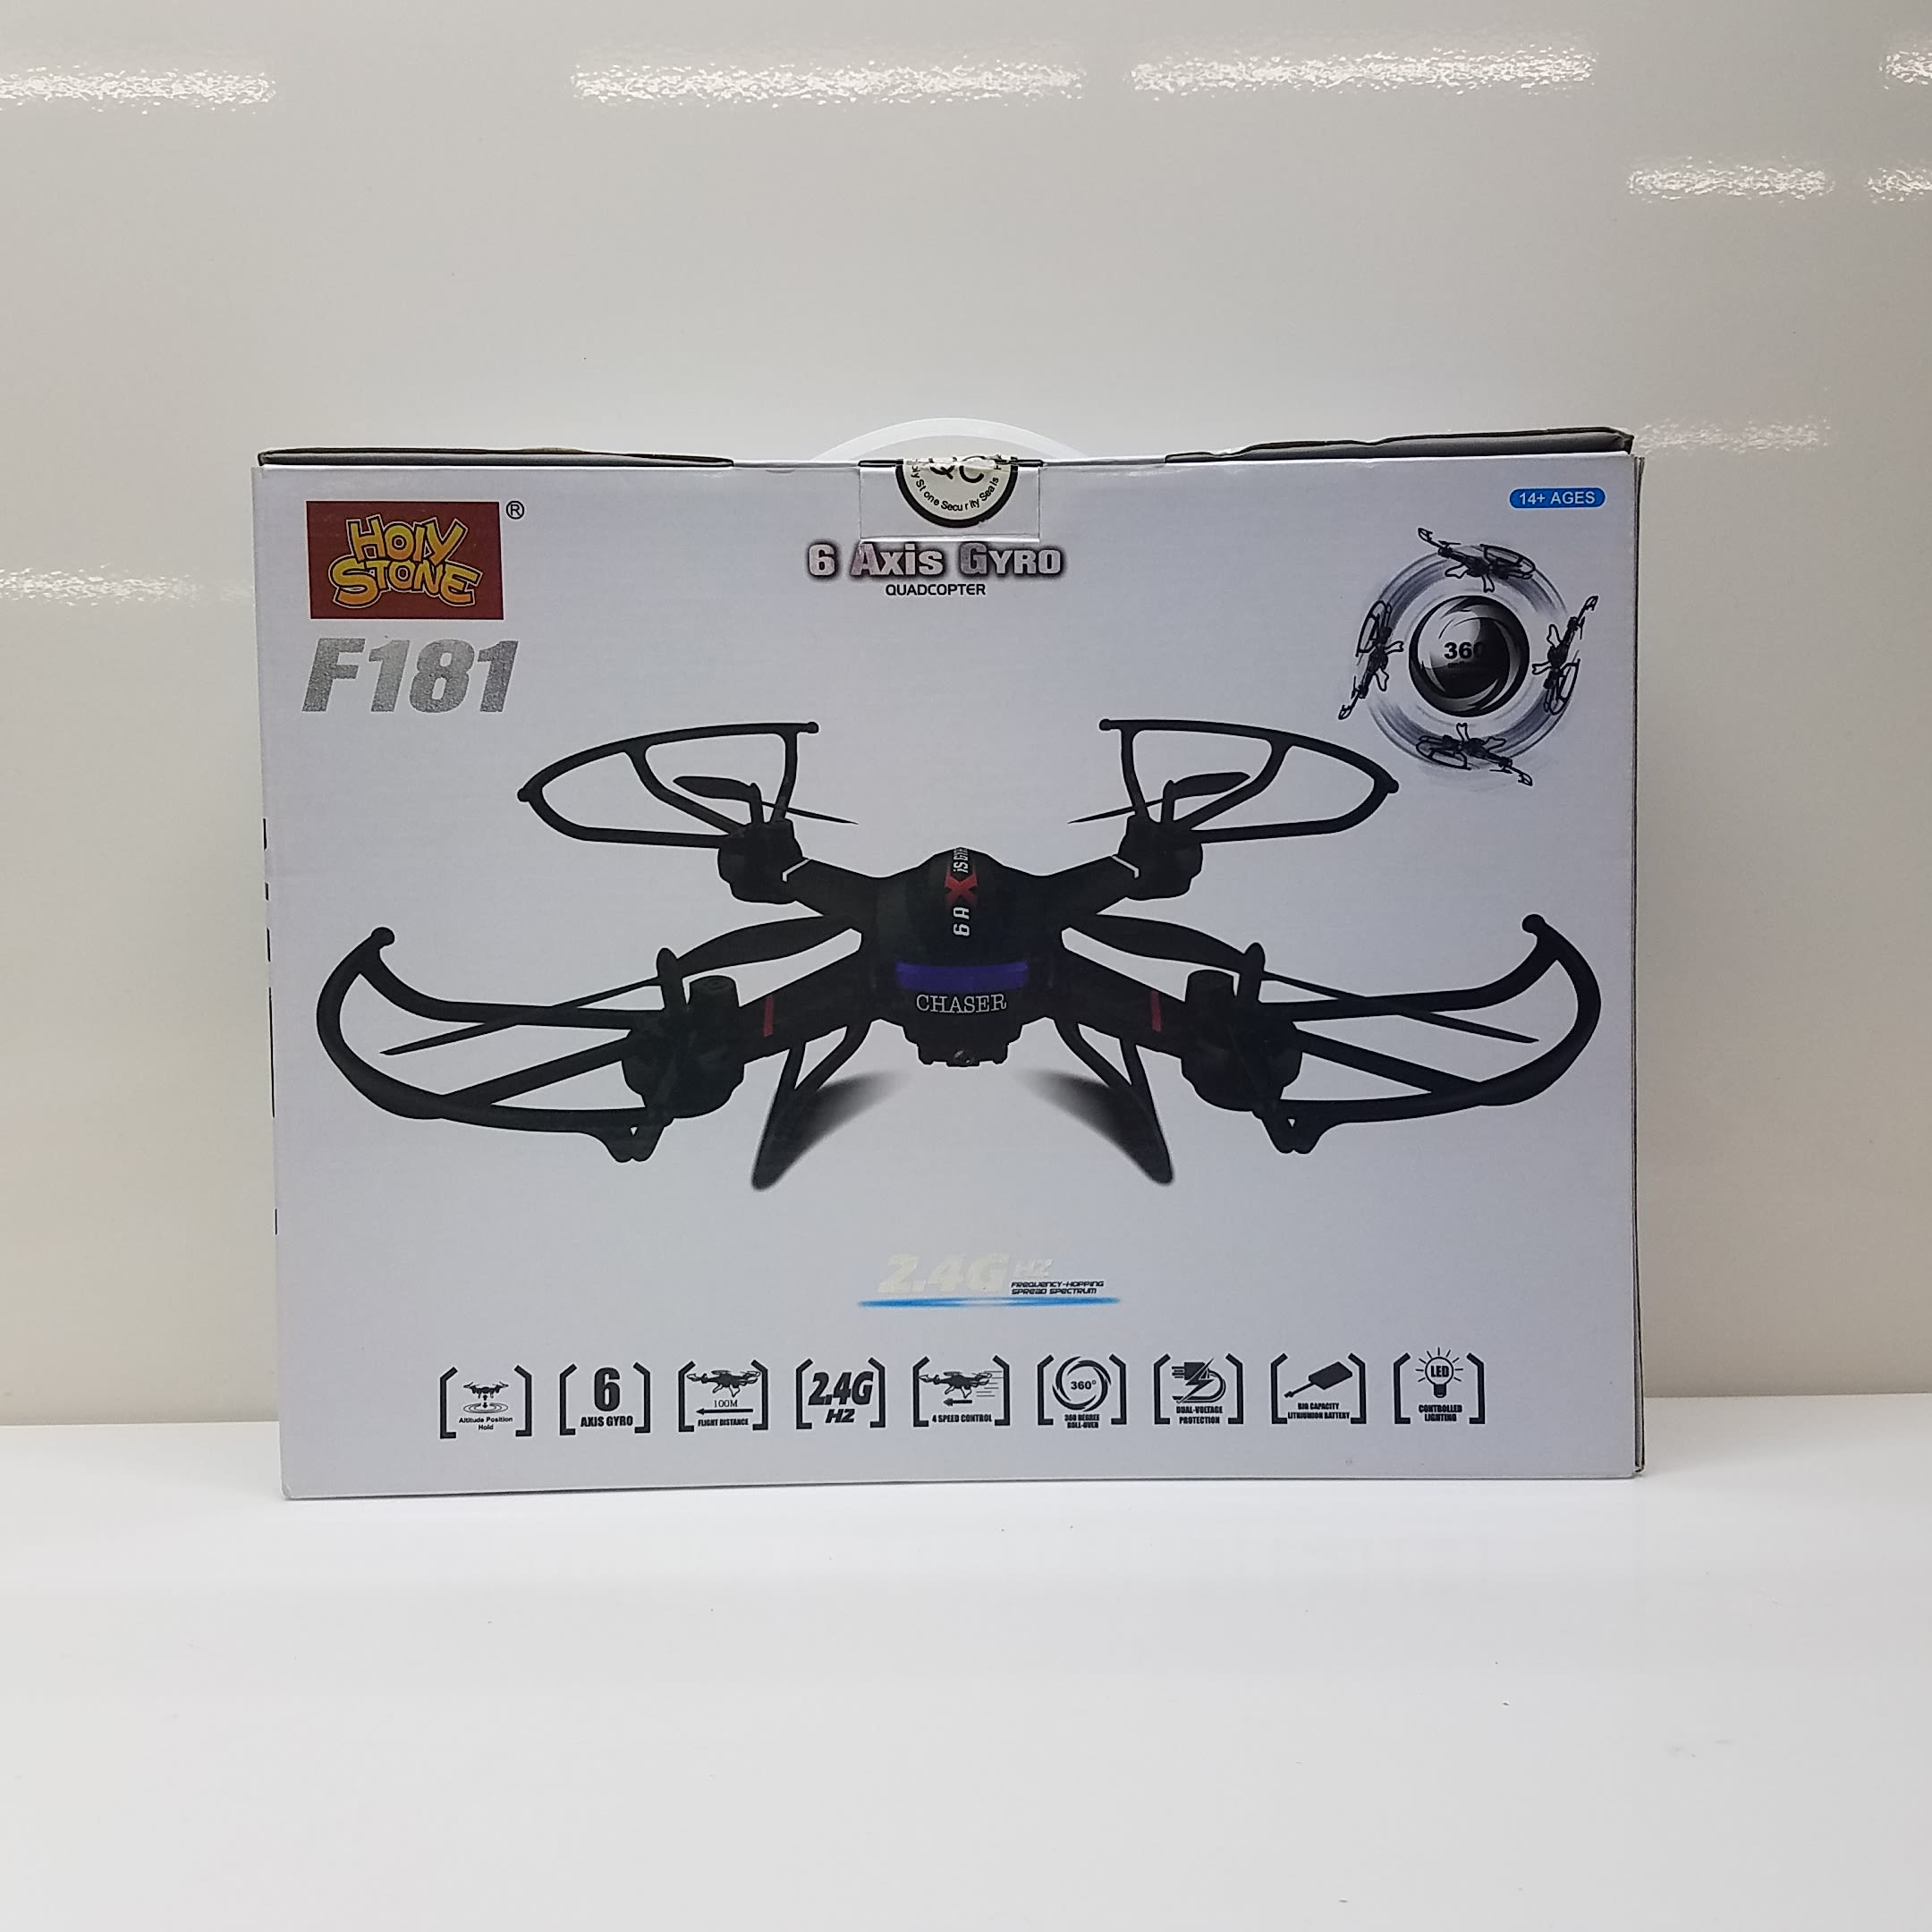 Buy the Holy Stone Smart Drone F181W Axis Gyro System Drone HD